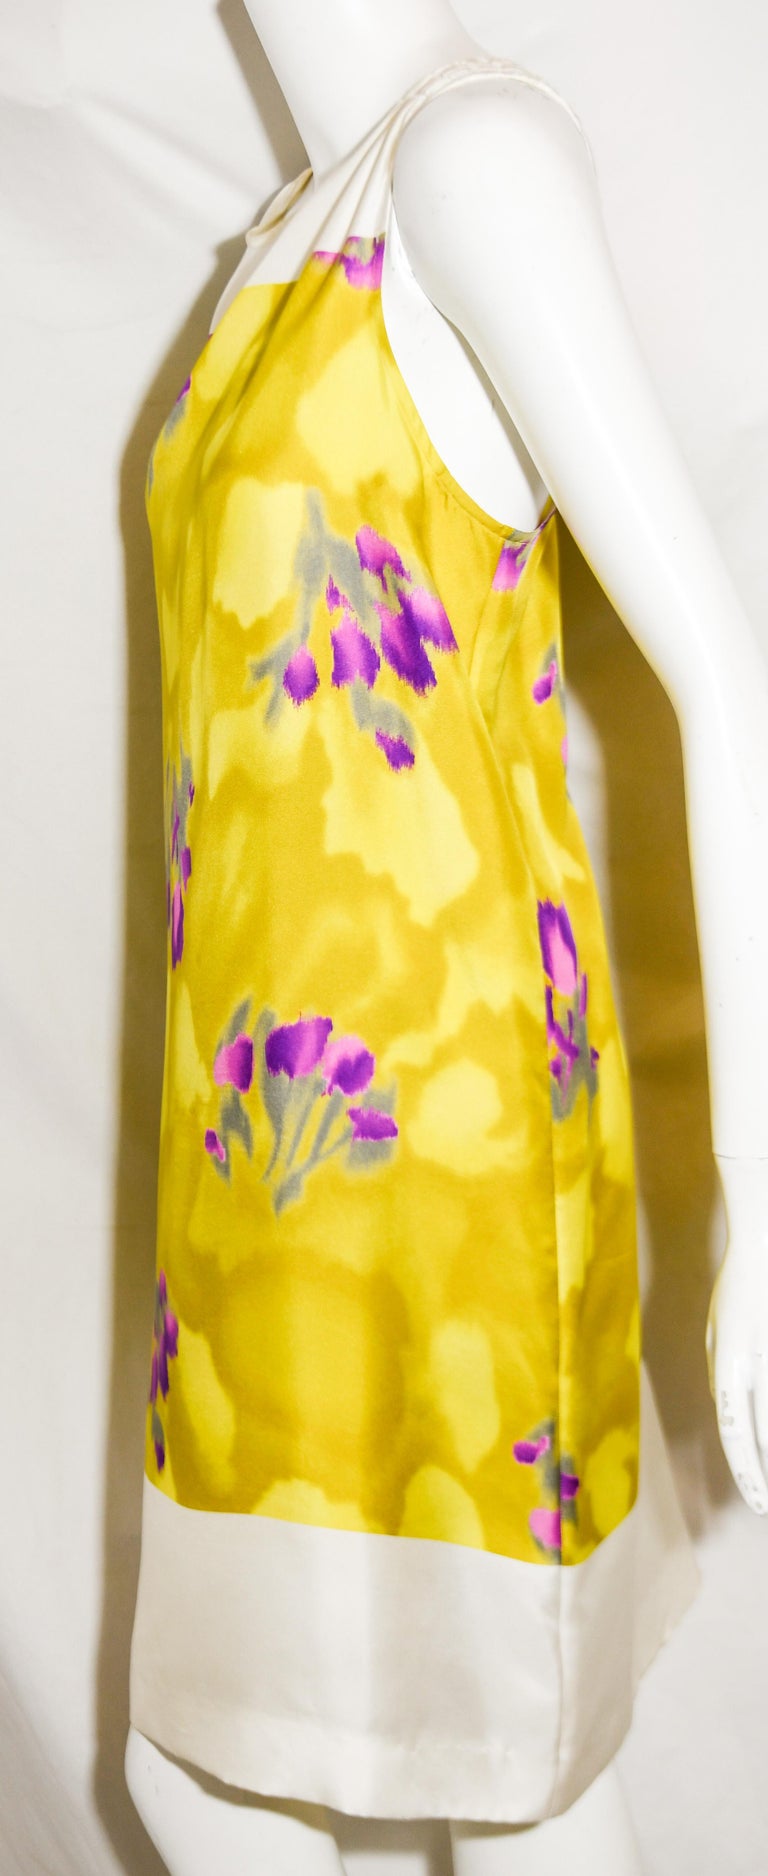 Dries Van Noten White,Yellow and Violet Floral Sleeveless Dress For ...